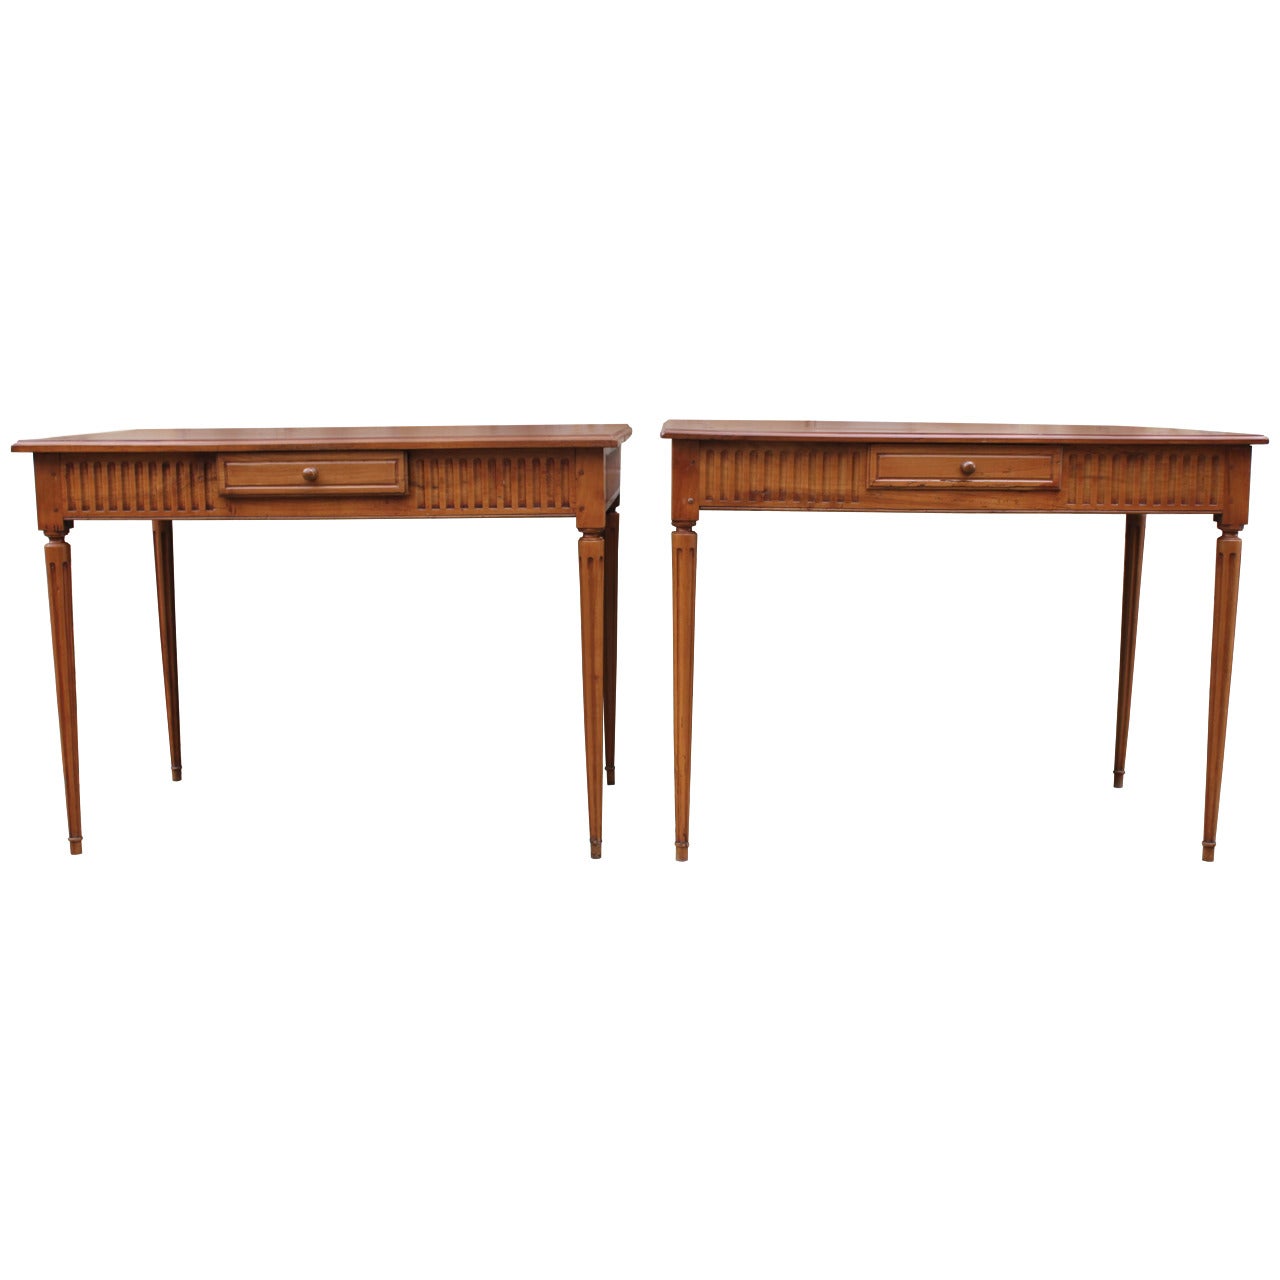 Pair of French Tables or Writing Desks Early 20th Century